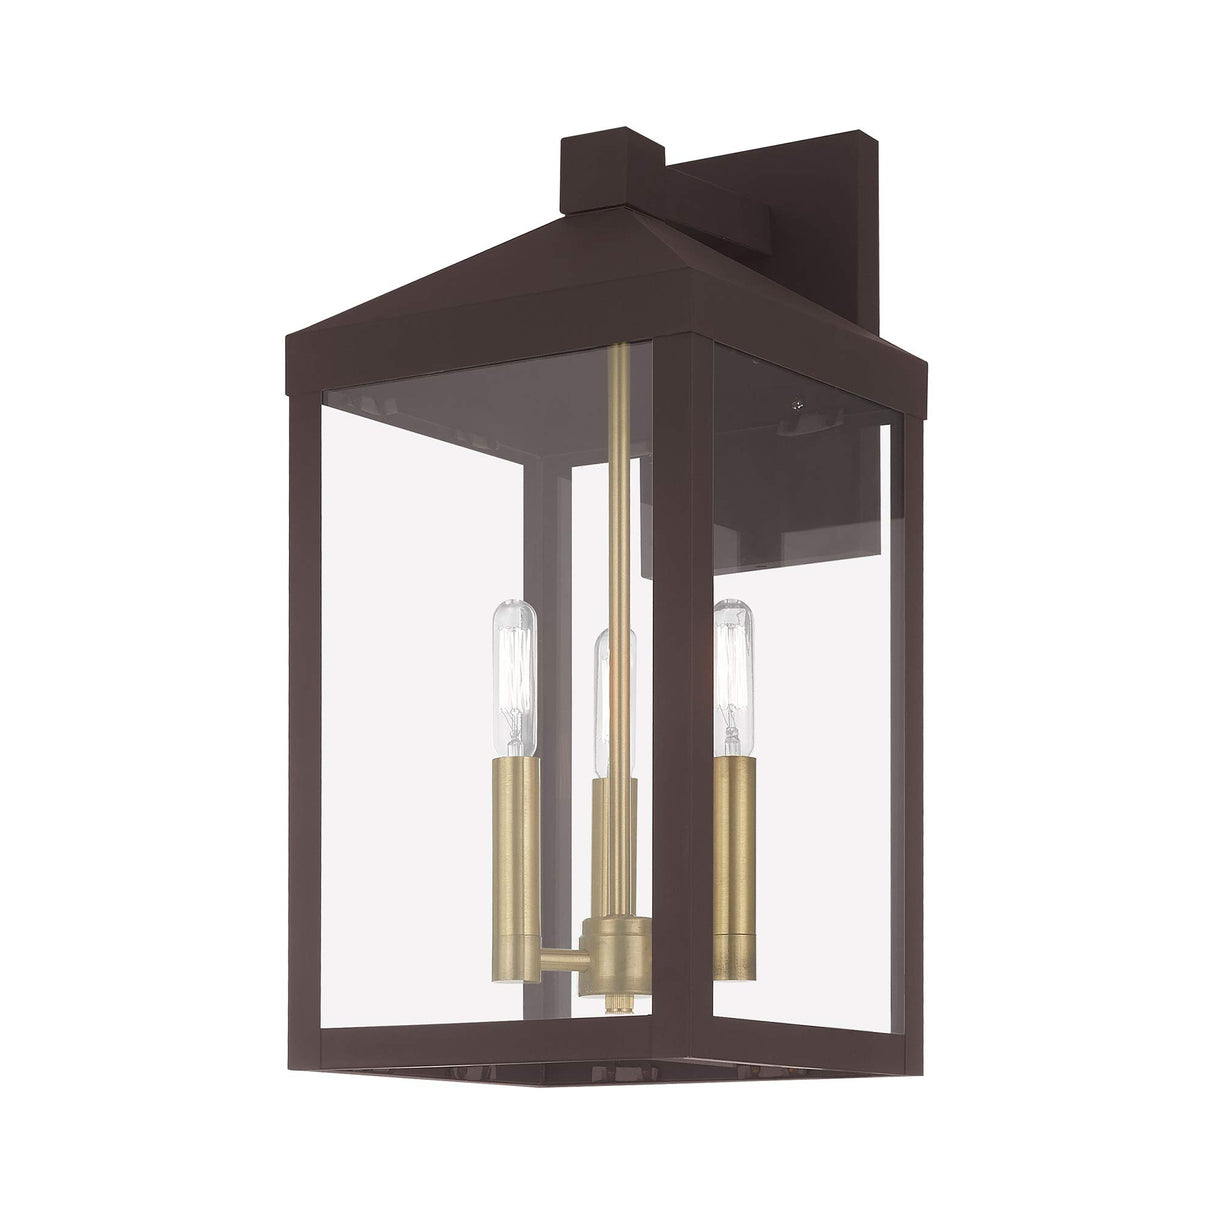 Livex Lighting 20584-07 Transitional Three Light Outdoor Wall Lantern from Nyack Collection in Bronze/Dark Finish